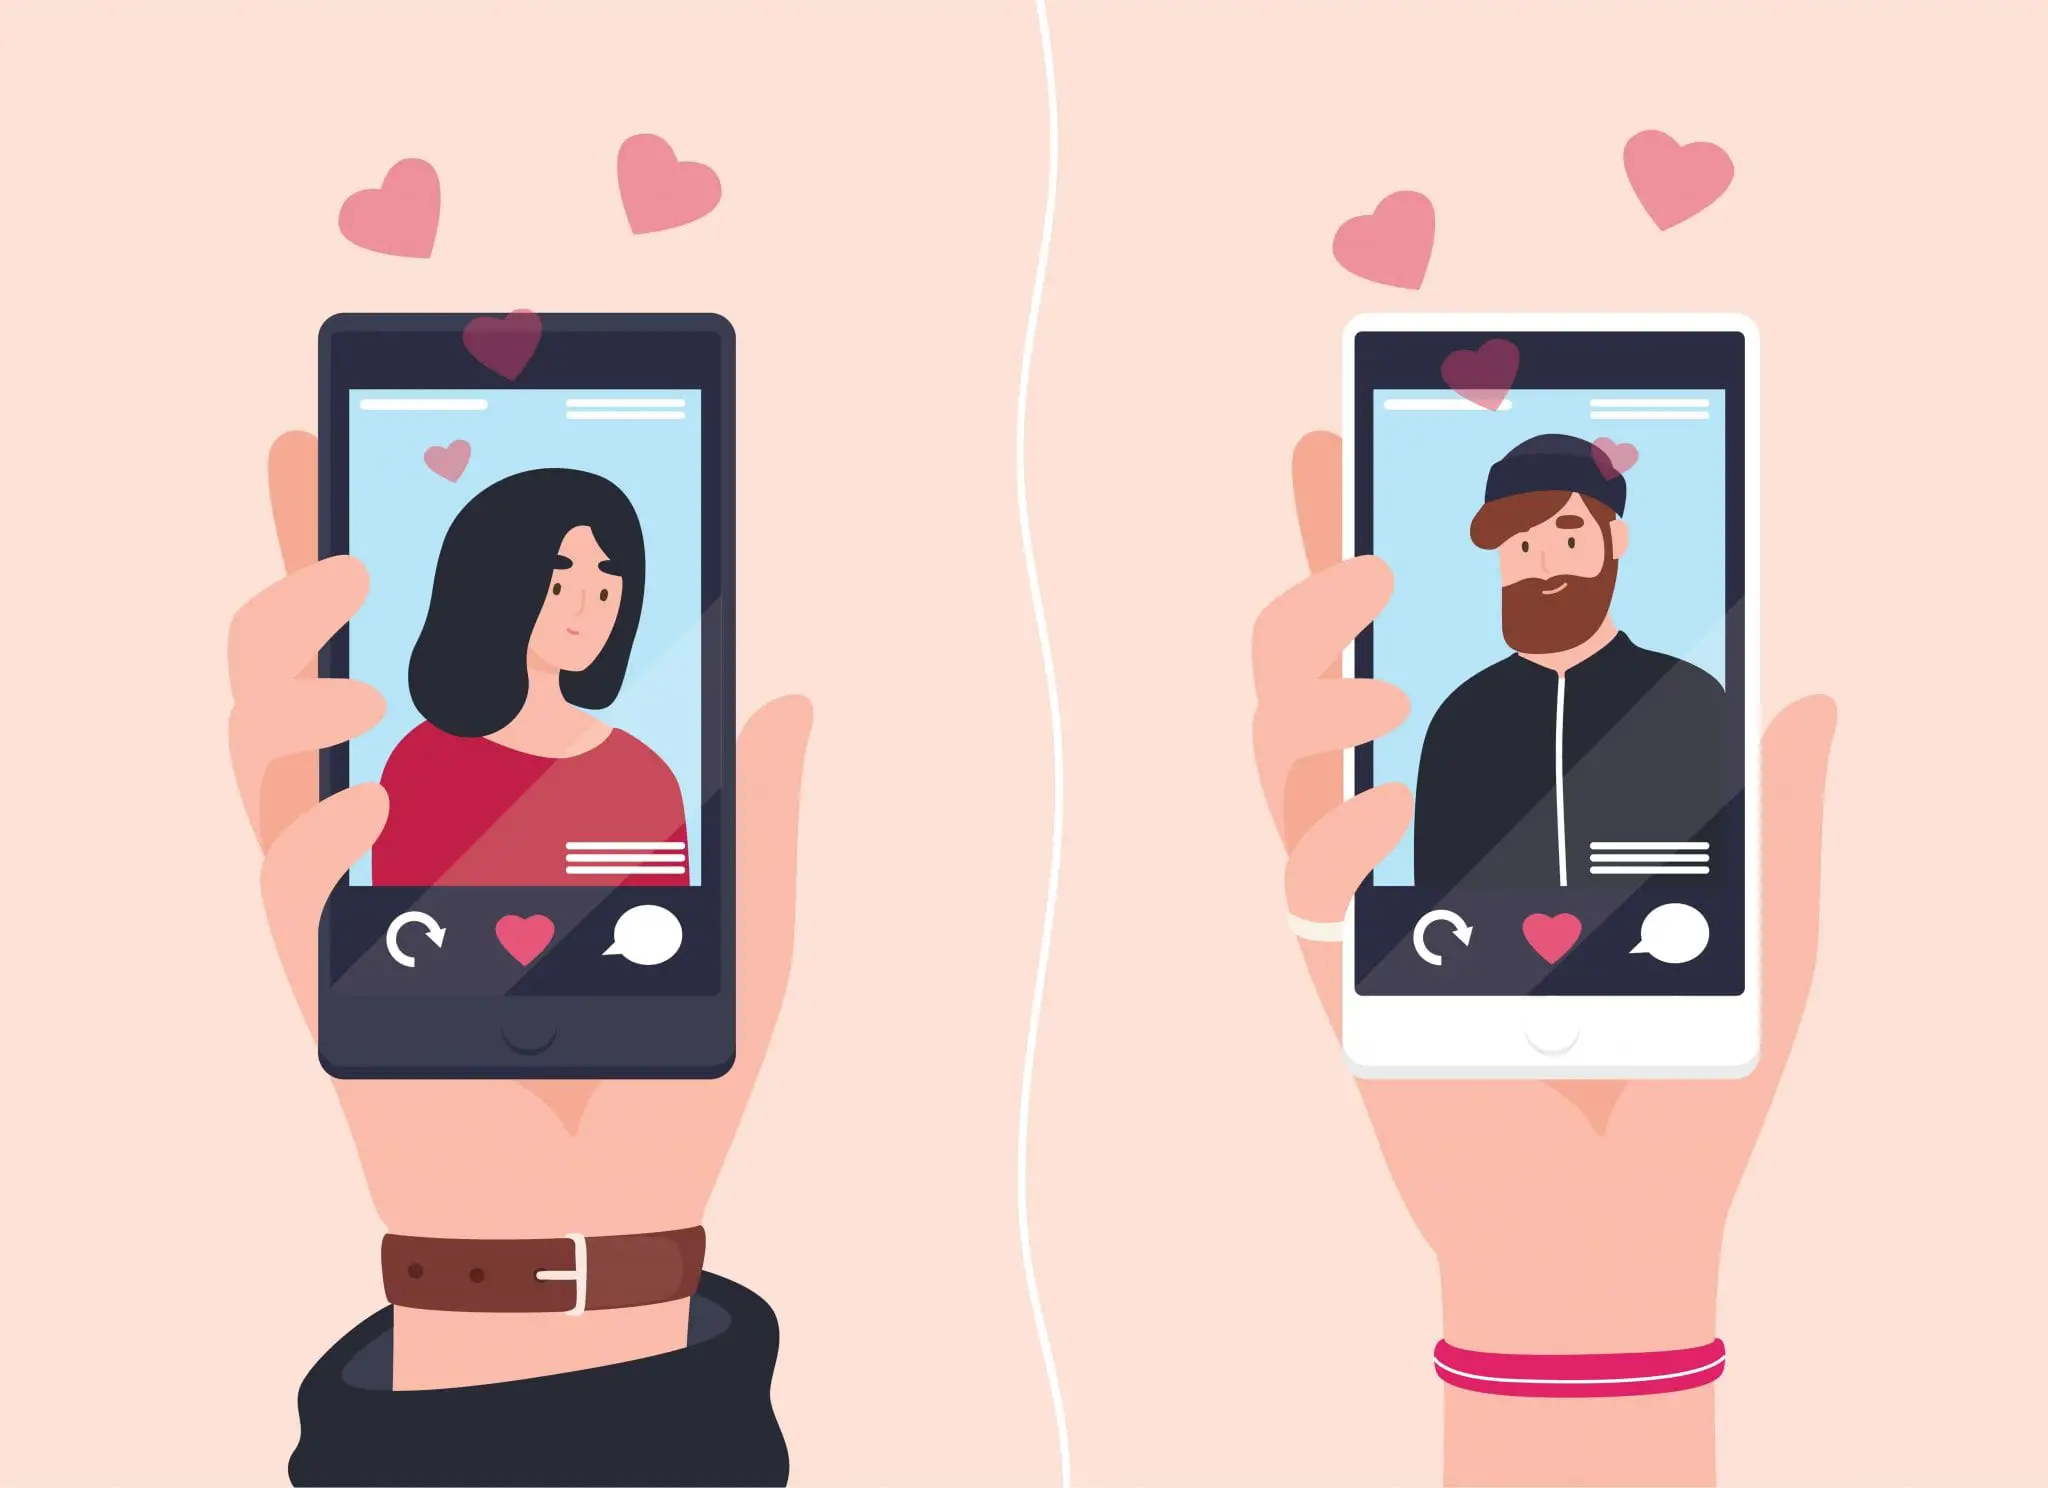 Male and Female Hands Holding Smartphones With Portraits of Man and Woman on Screens. Social Mobile Application for Dating, Searching for Romantic Partner